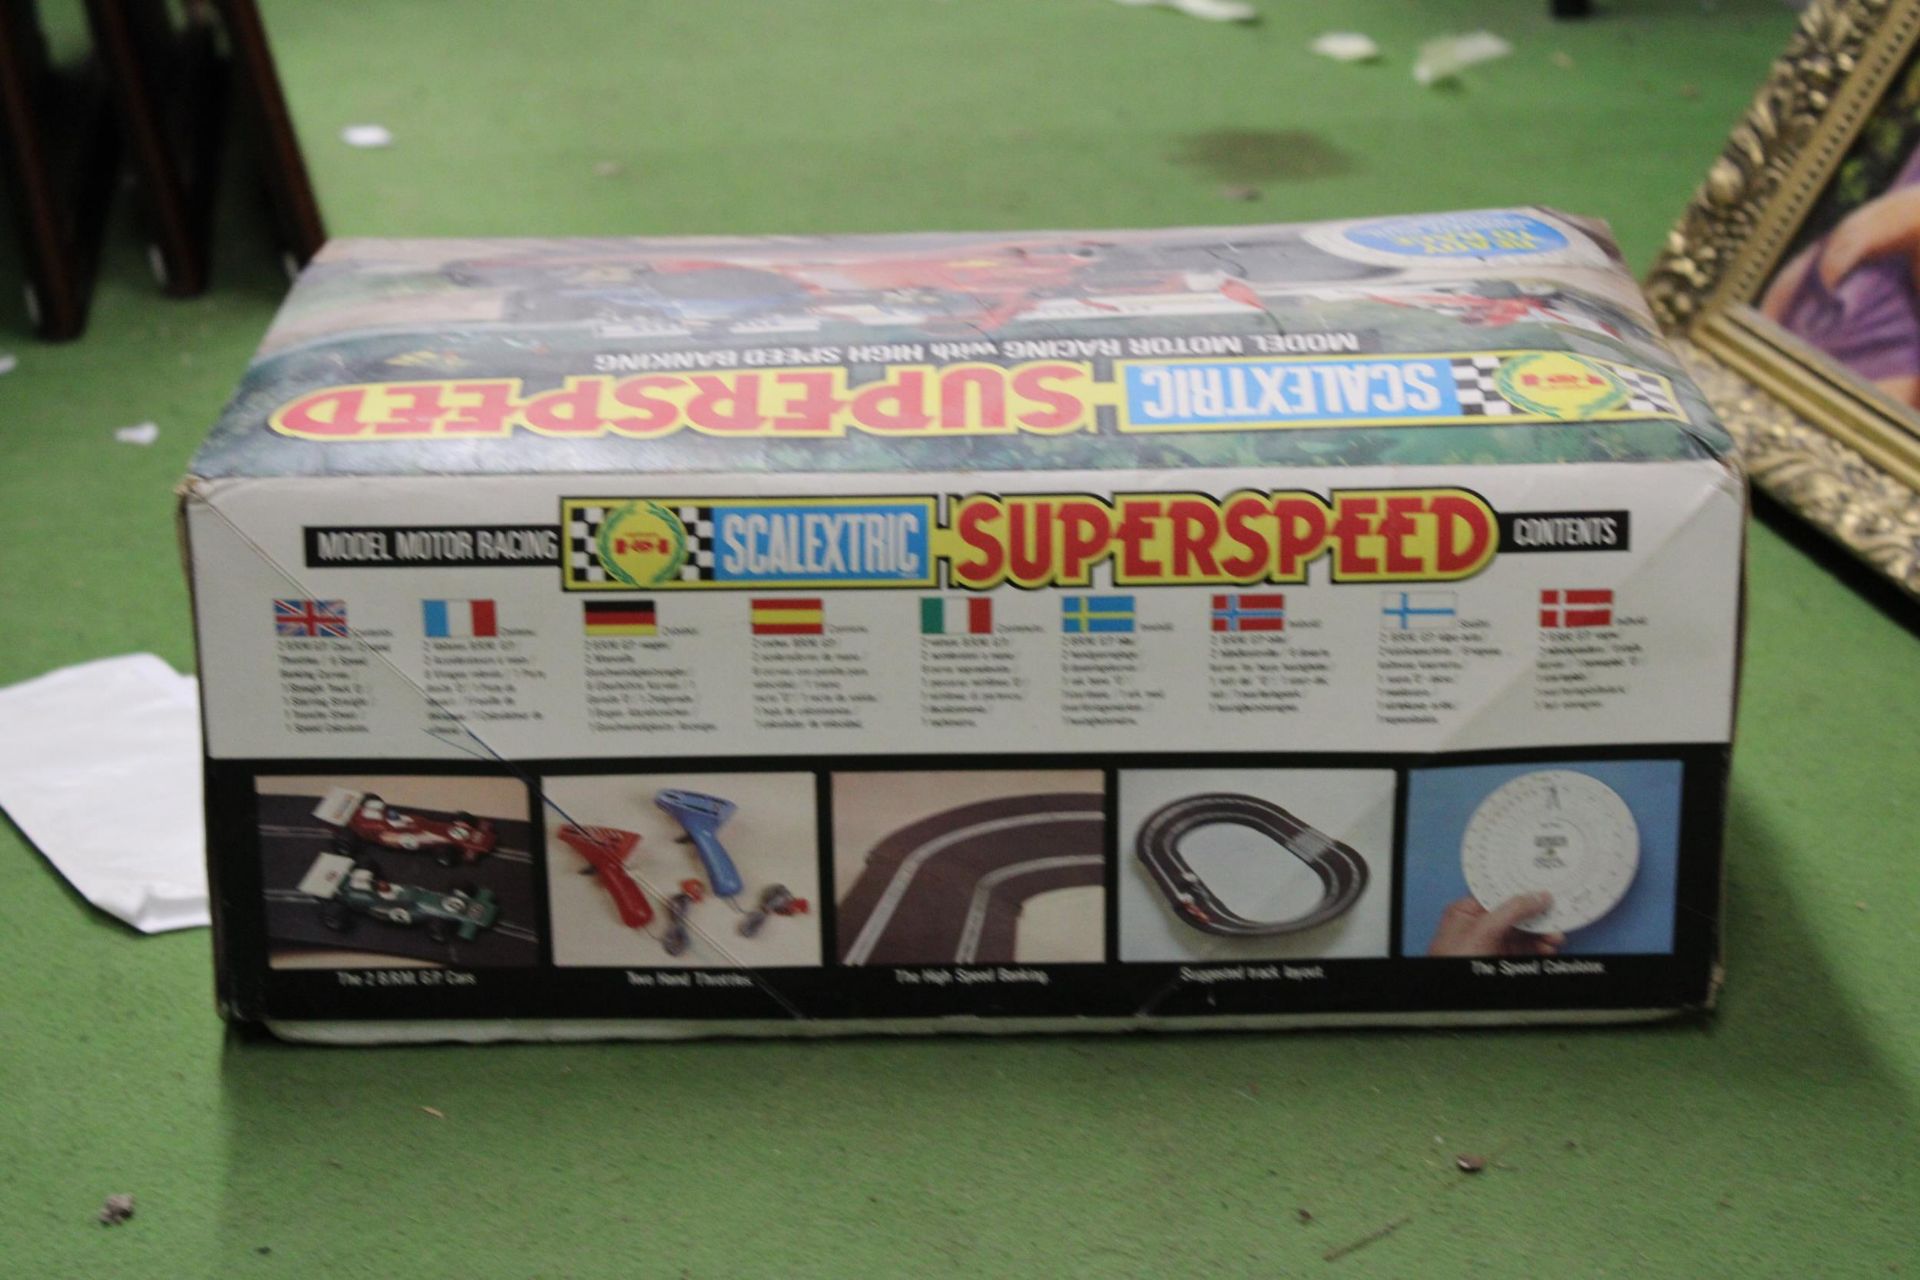 A BOXED SCALEXTRIC SUPERSPEED MODEL MOTOR RACING SET - Image 5 of 5